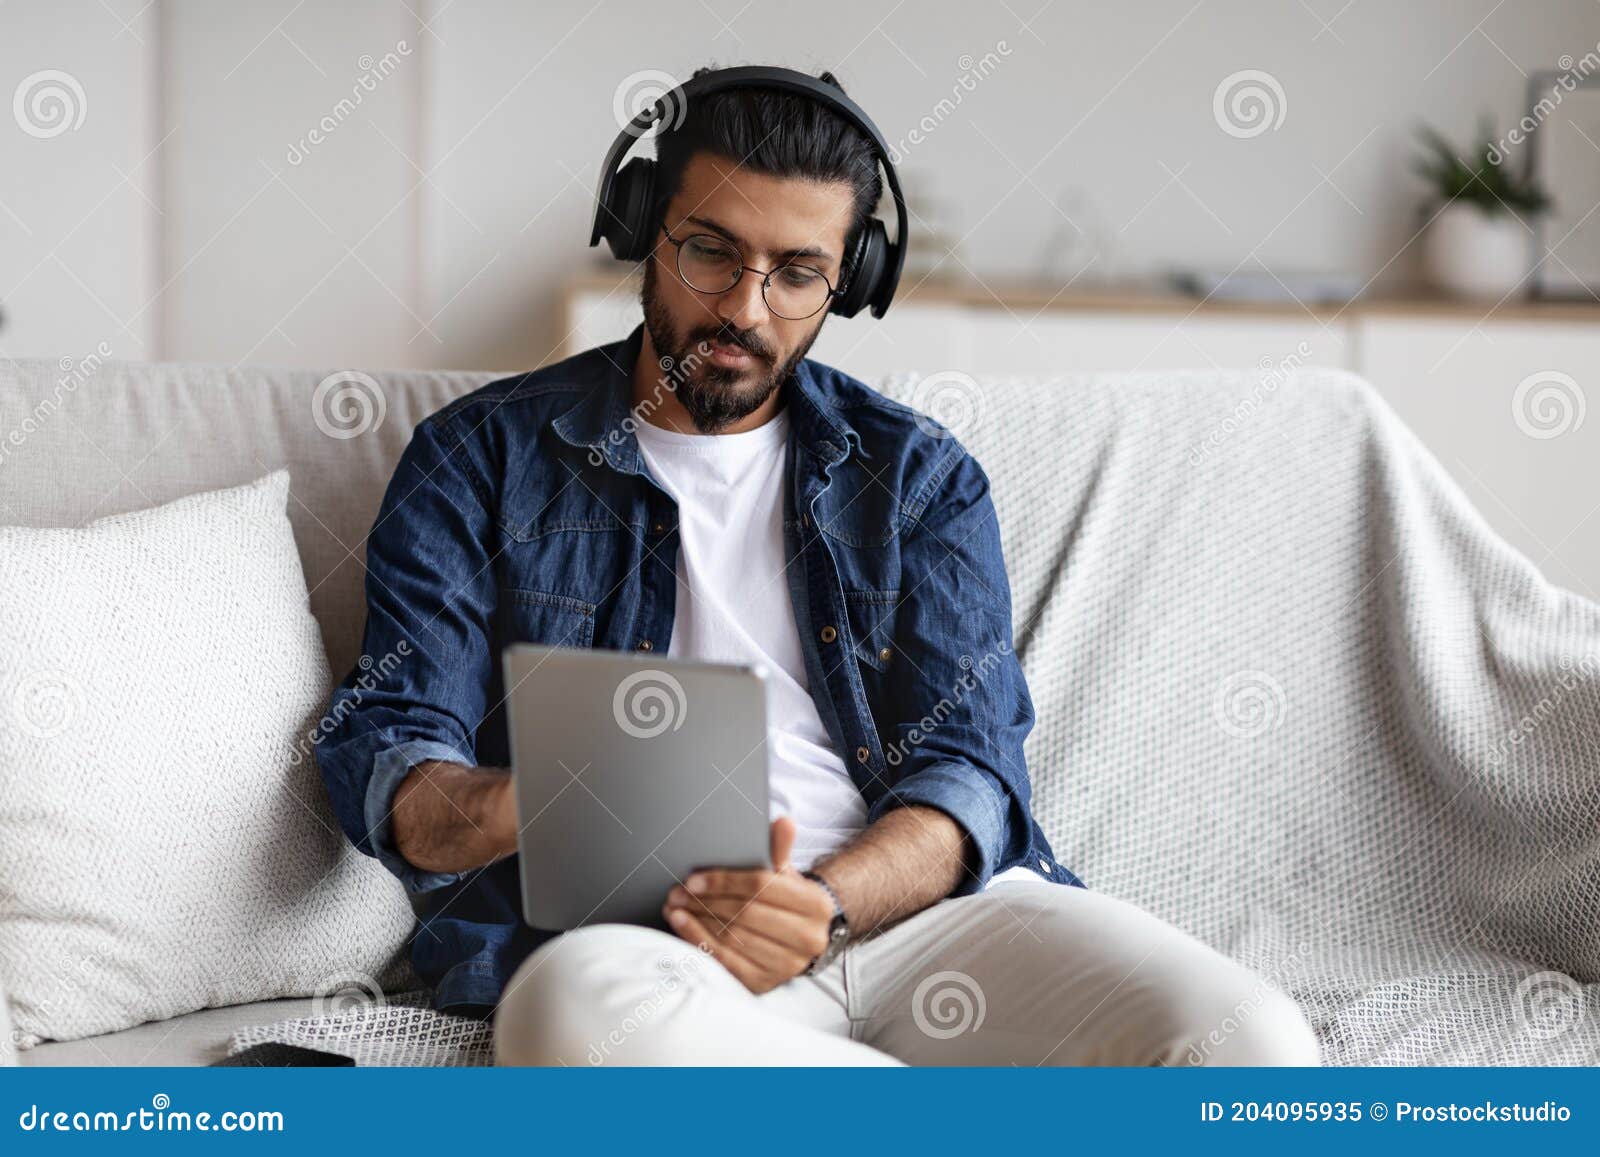 indian guy spending time at home with digital tablet and wireless headphones